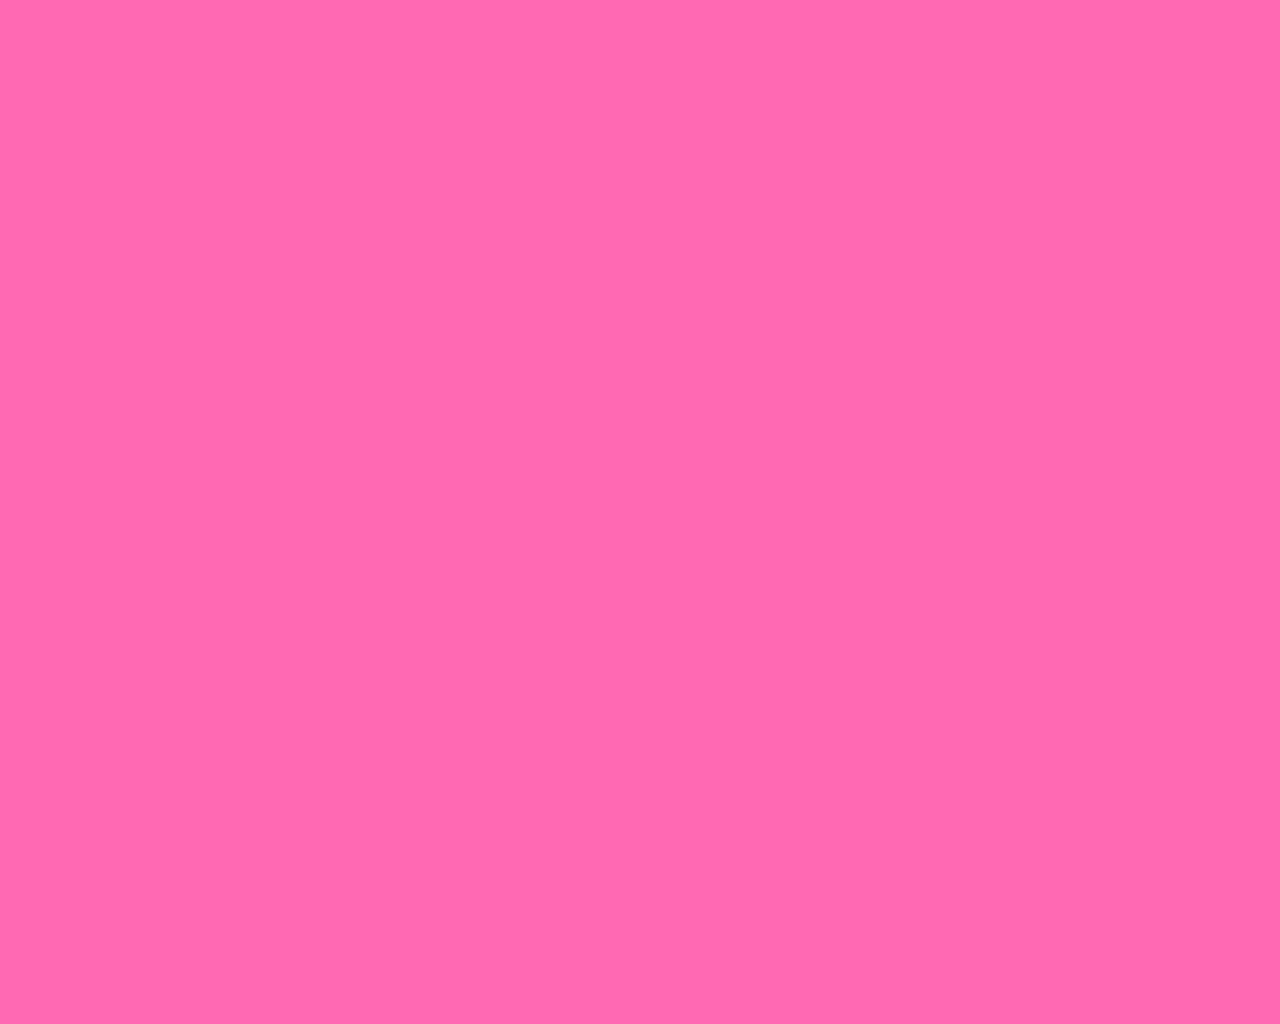 Bright Neon Pink Backgrounds 1280x1024 hot pink solid color